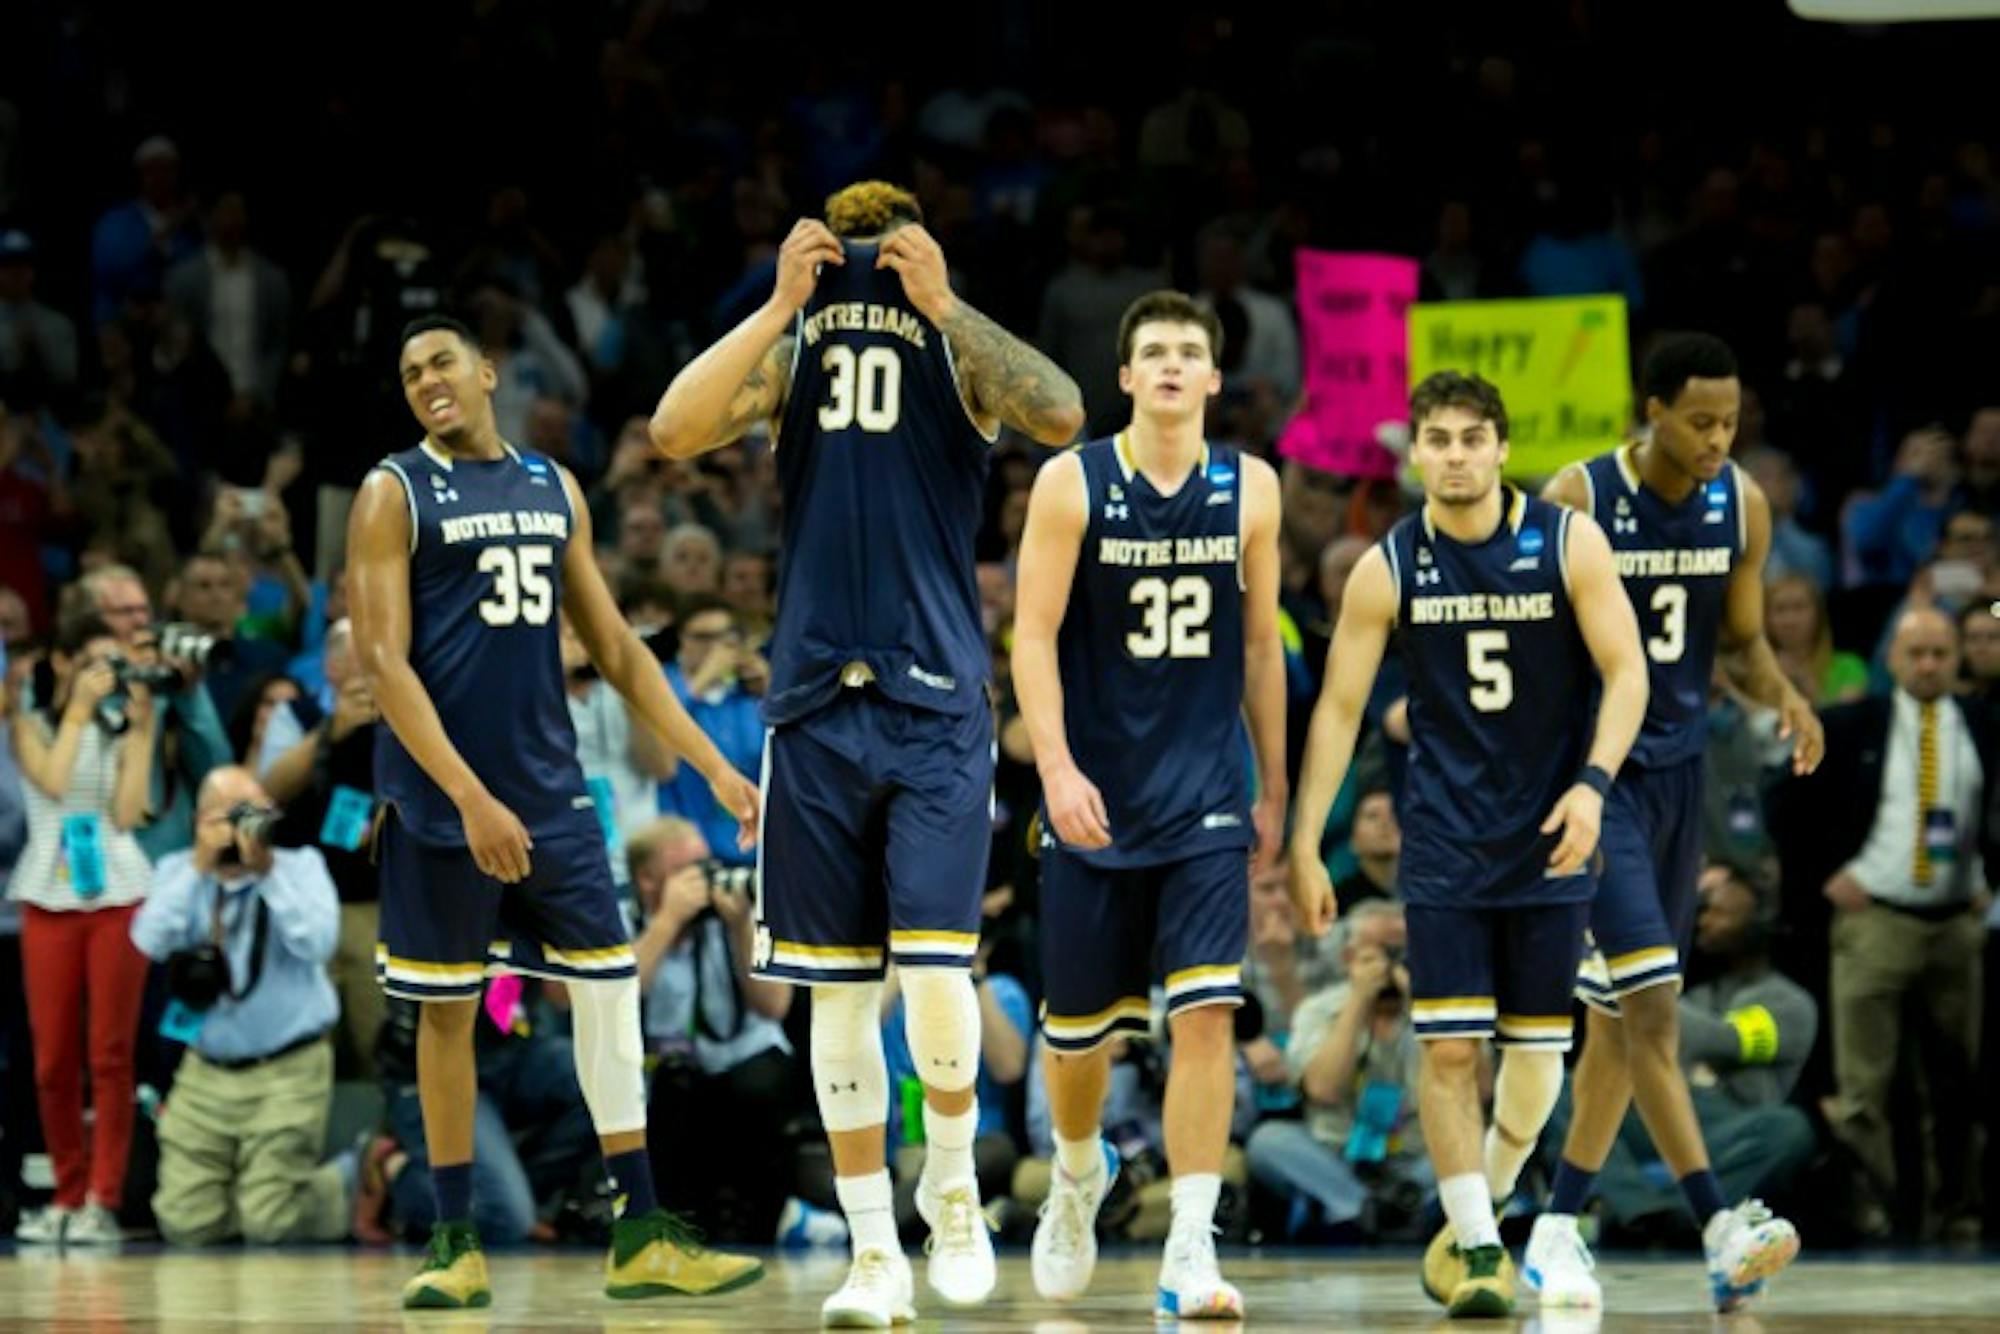 Notre Dame players look on dejectedly as the final seconds wind down of their 88-74 loss to North Carolina on Sunday in the Elite Eight.